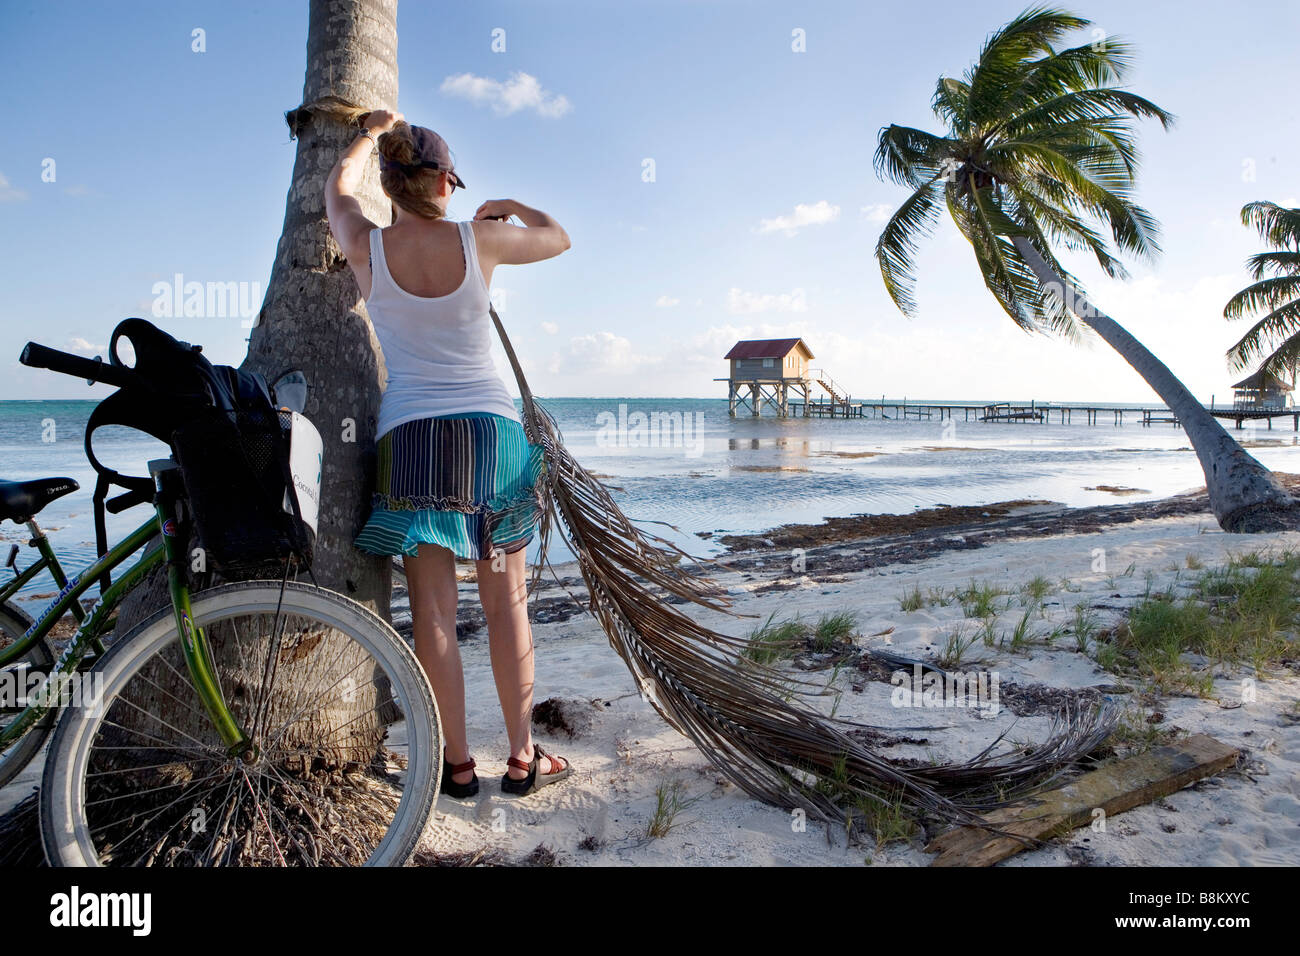 A young woman makes pictures on the beach in the late afternoon while leaning against a palm tree on Ambergris Caye in Belize. Stock Photo